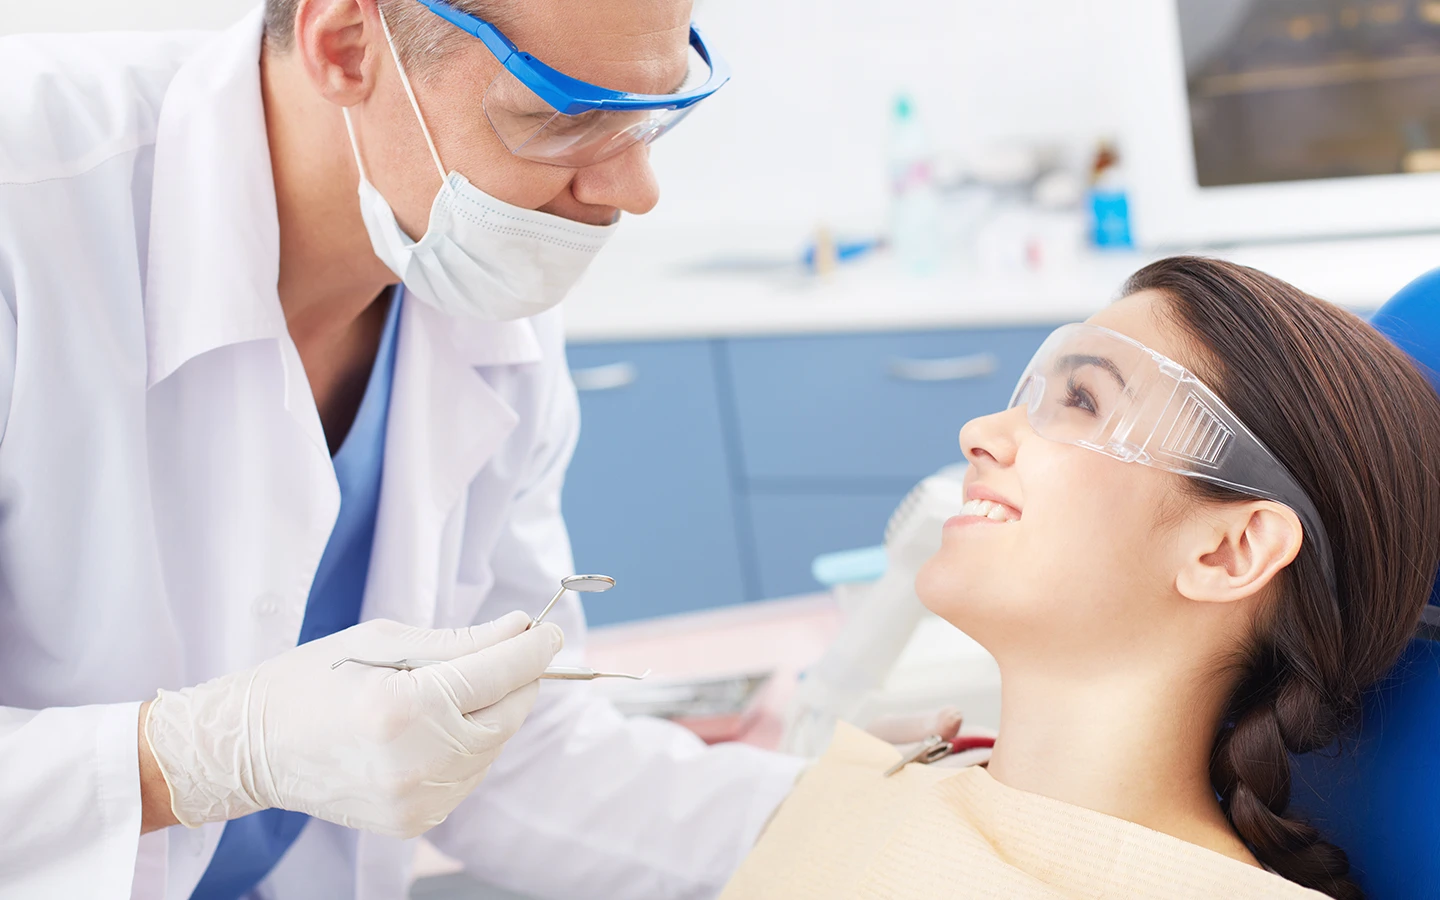 Treatment of cavities and injuries with dental endodontics